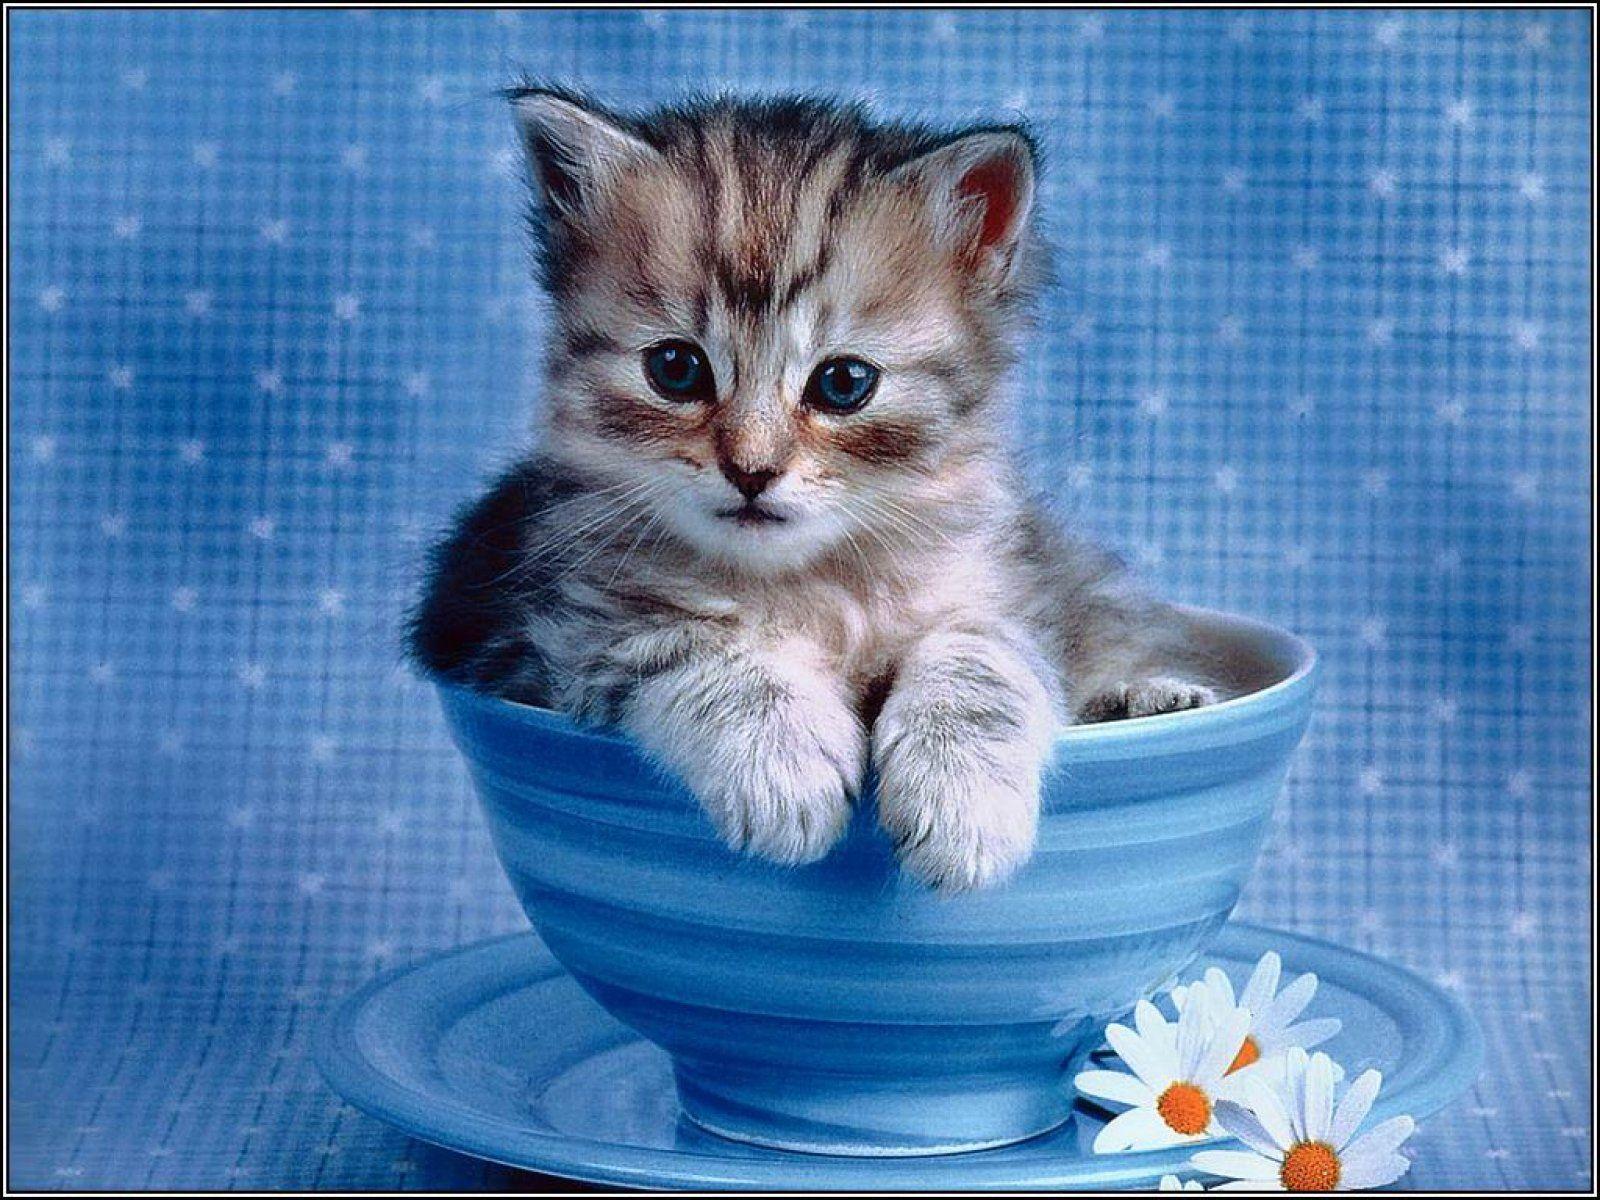 Cute Baby Cats Wallpaper Group 1920×1200 Cats Image Wallpaper